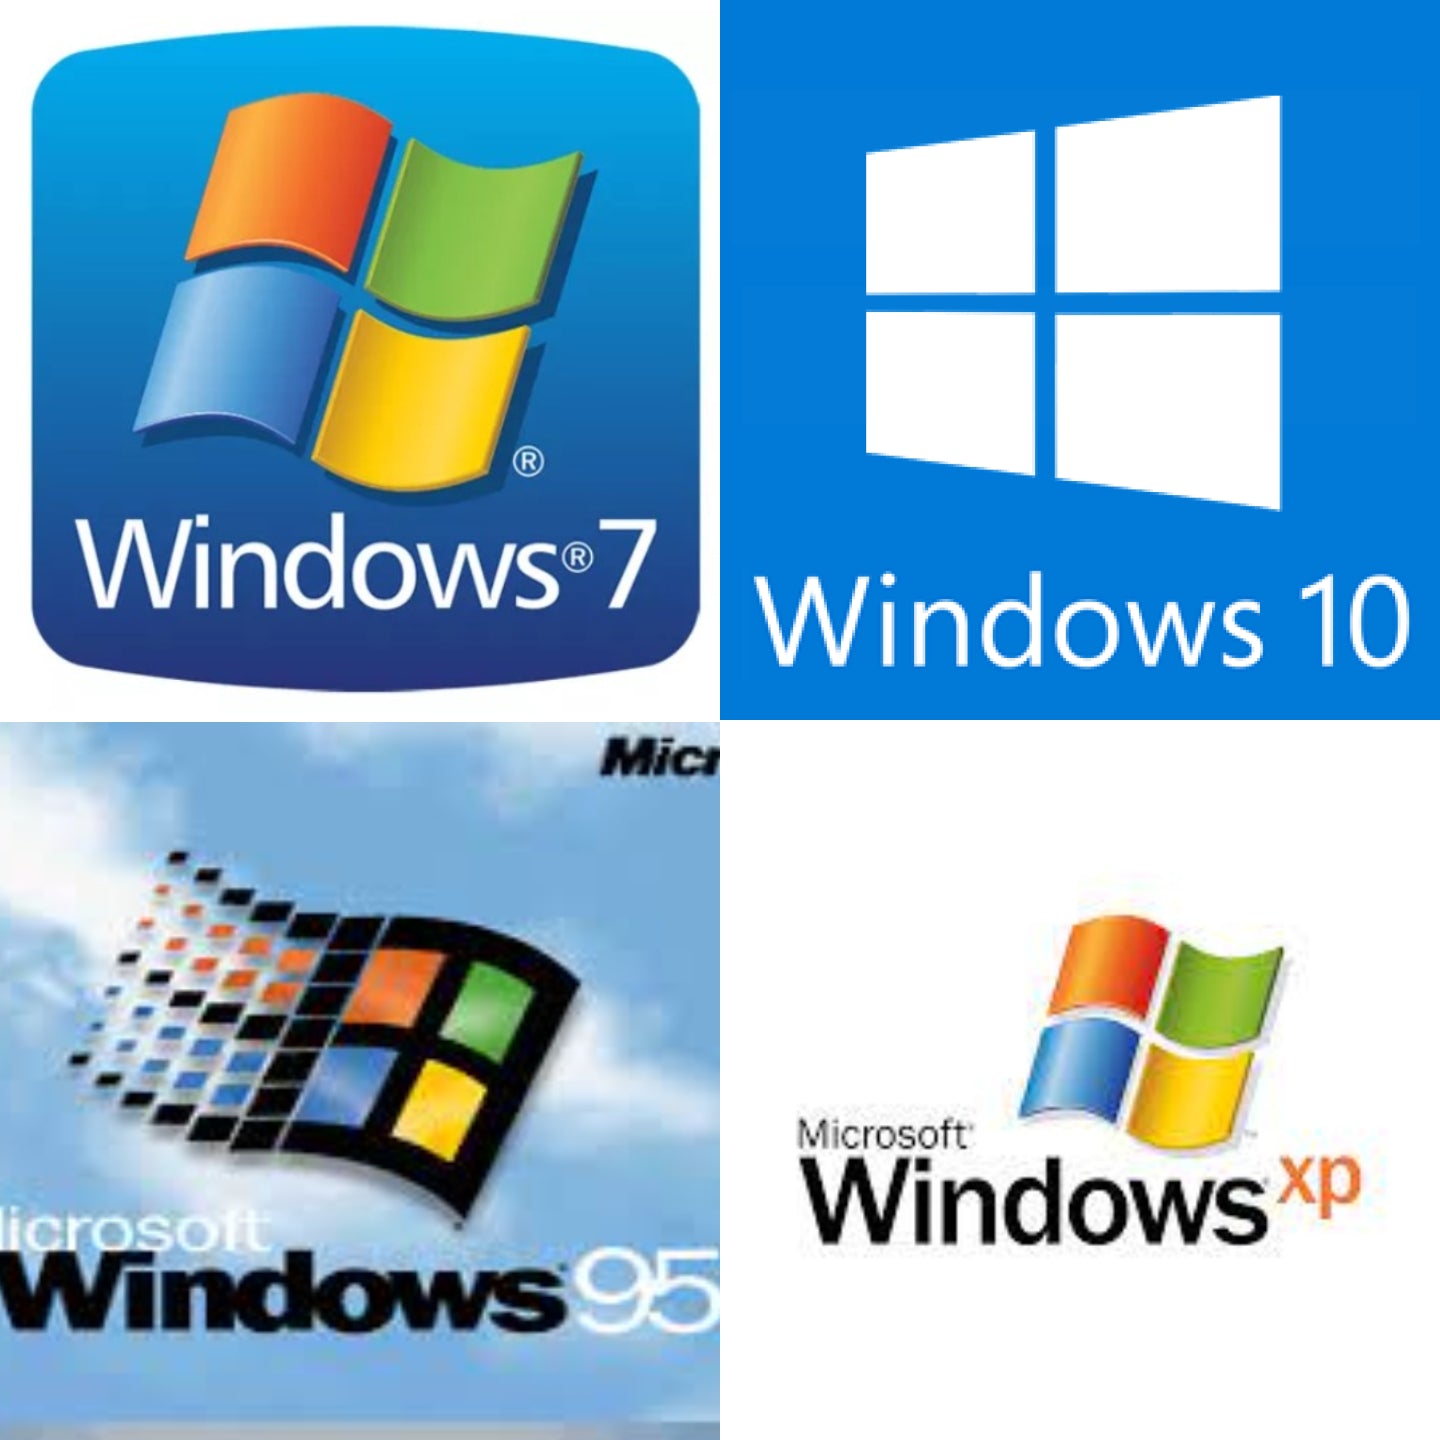 The Best Windows Version - From 1.0 to Windows 10